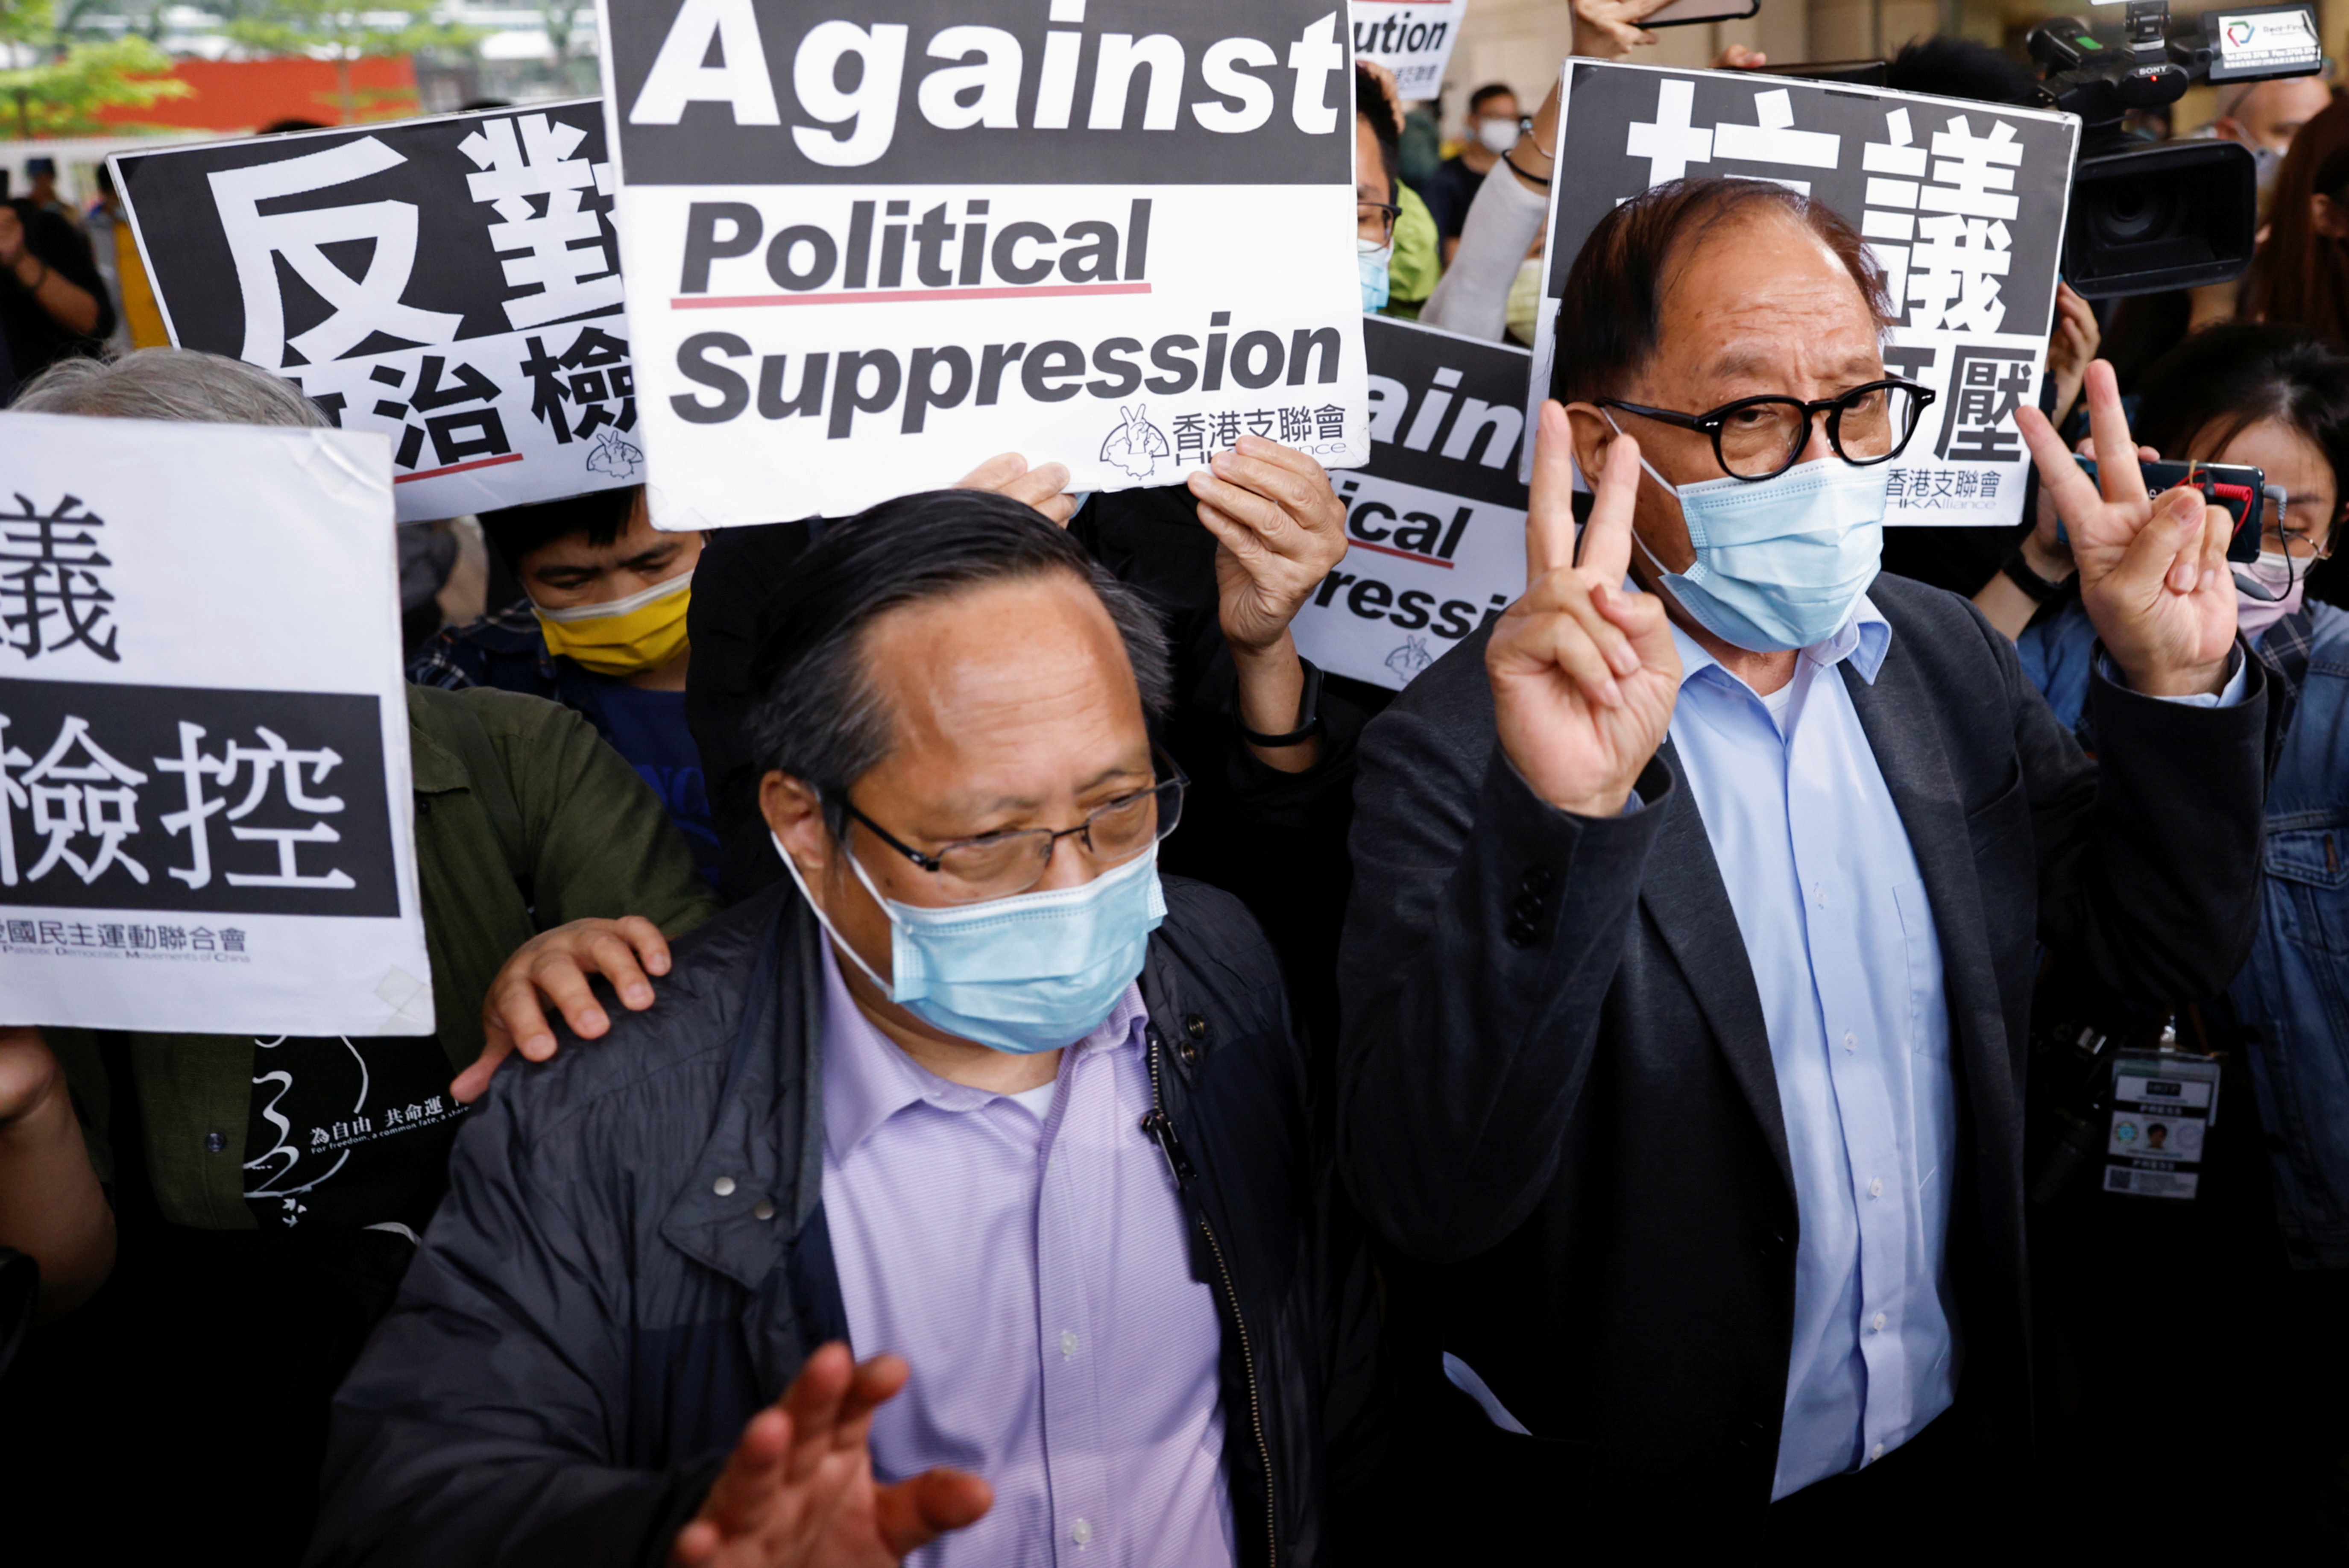 Pro-democracy activists Albert Ho and Yeung Sum leave the West Kowloon Courts after getting their suspended sentence on unauthorised assembly, in Hong Kong